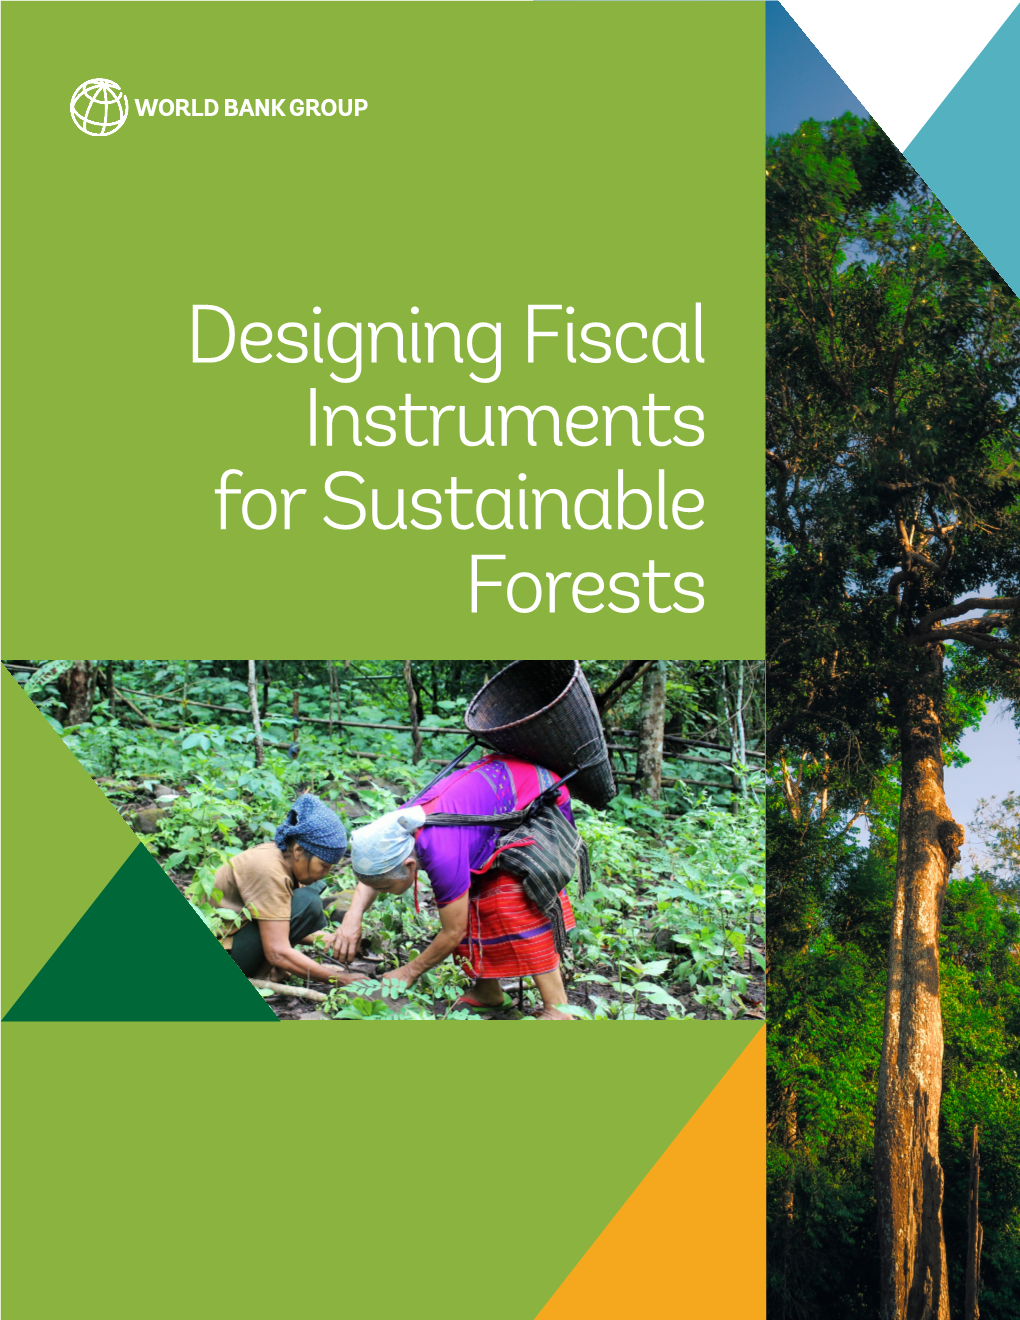 Designing Fiscal Instruments for Sustainable Forests